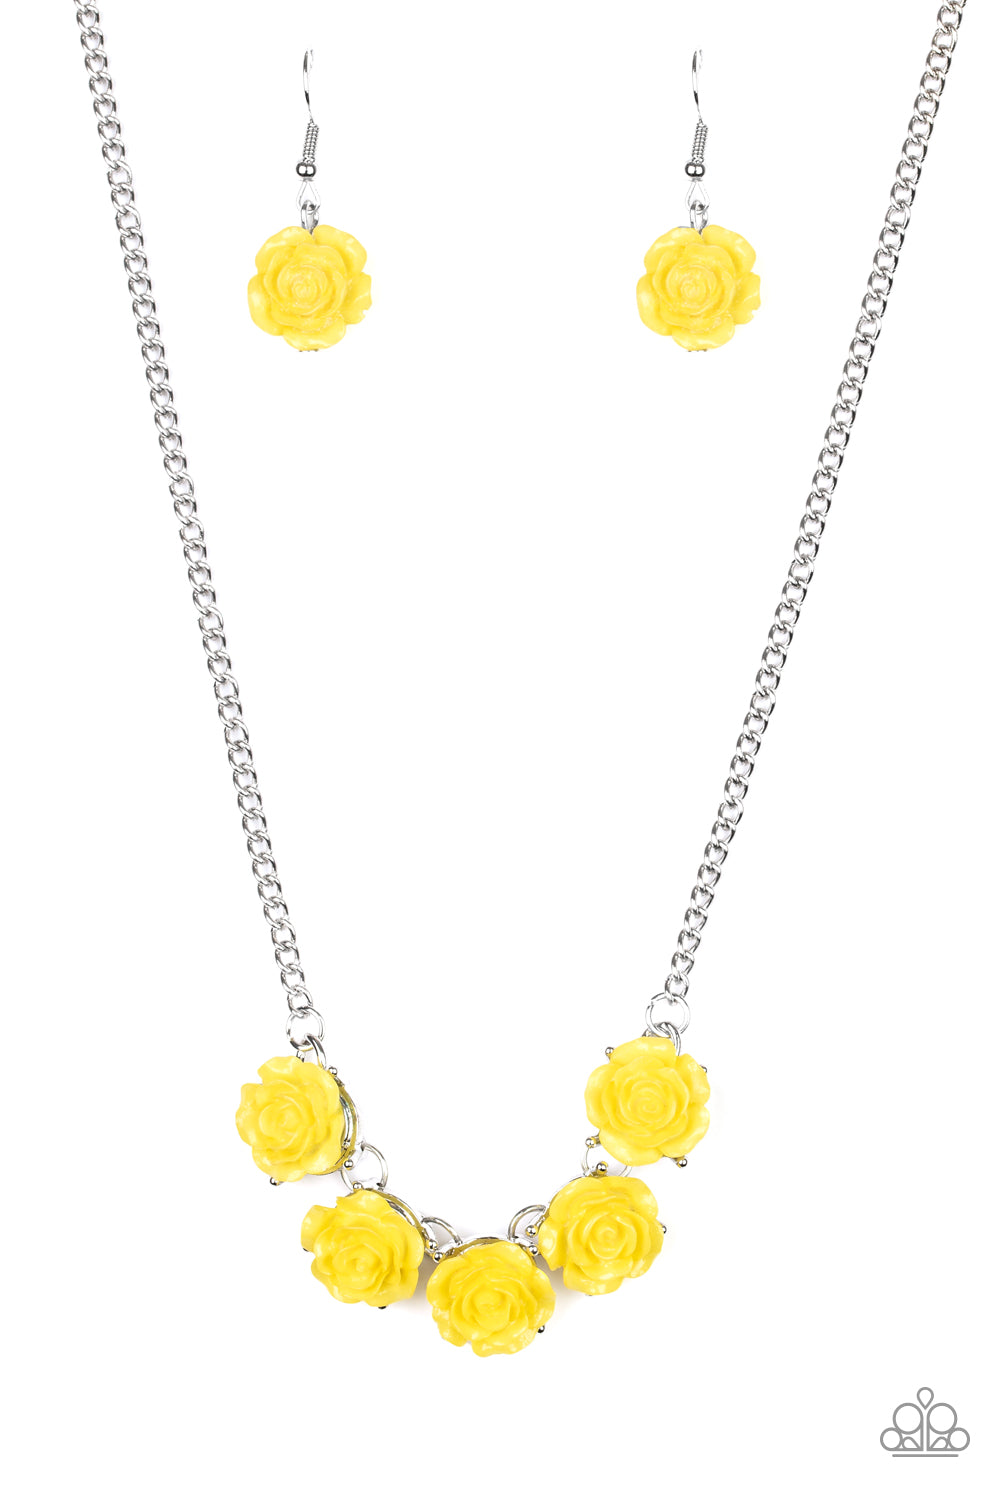 Garden Party Posh Yellow Necklace - Paparazzi Accessories Attached to a shimmery silver chain, a dainty collection of yellow resin roses collect beneath the collar for a whimsical look. Features an adjustable clasp closure.  ﻿All Paparazzi Accessories are lead free and nickel free!  Sold as one individual necklace. Includes one pair of matching earrings.